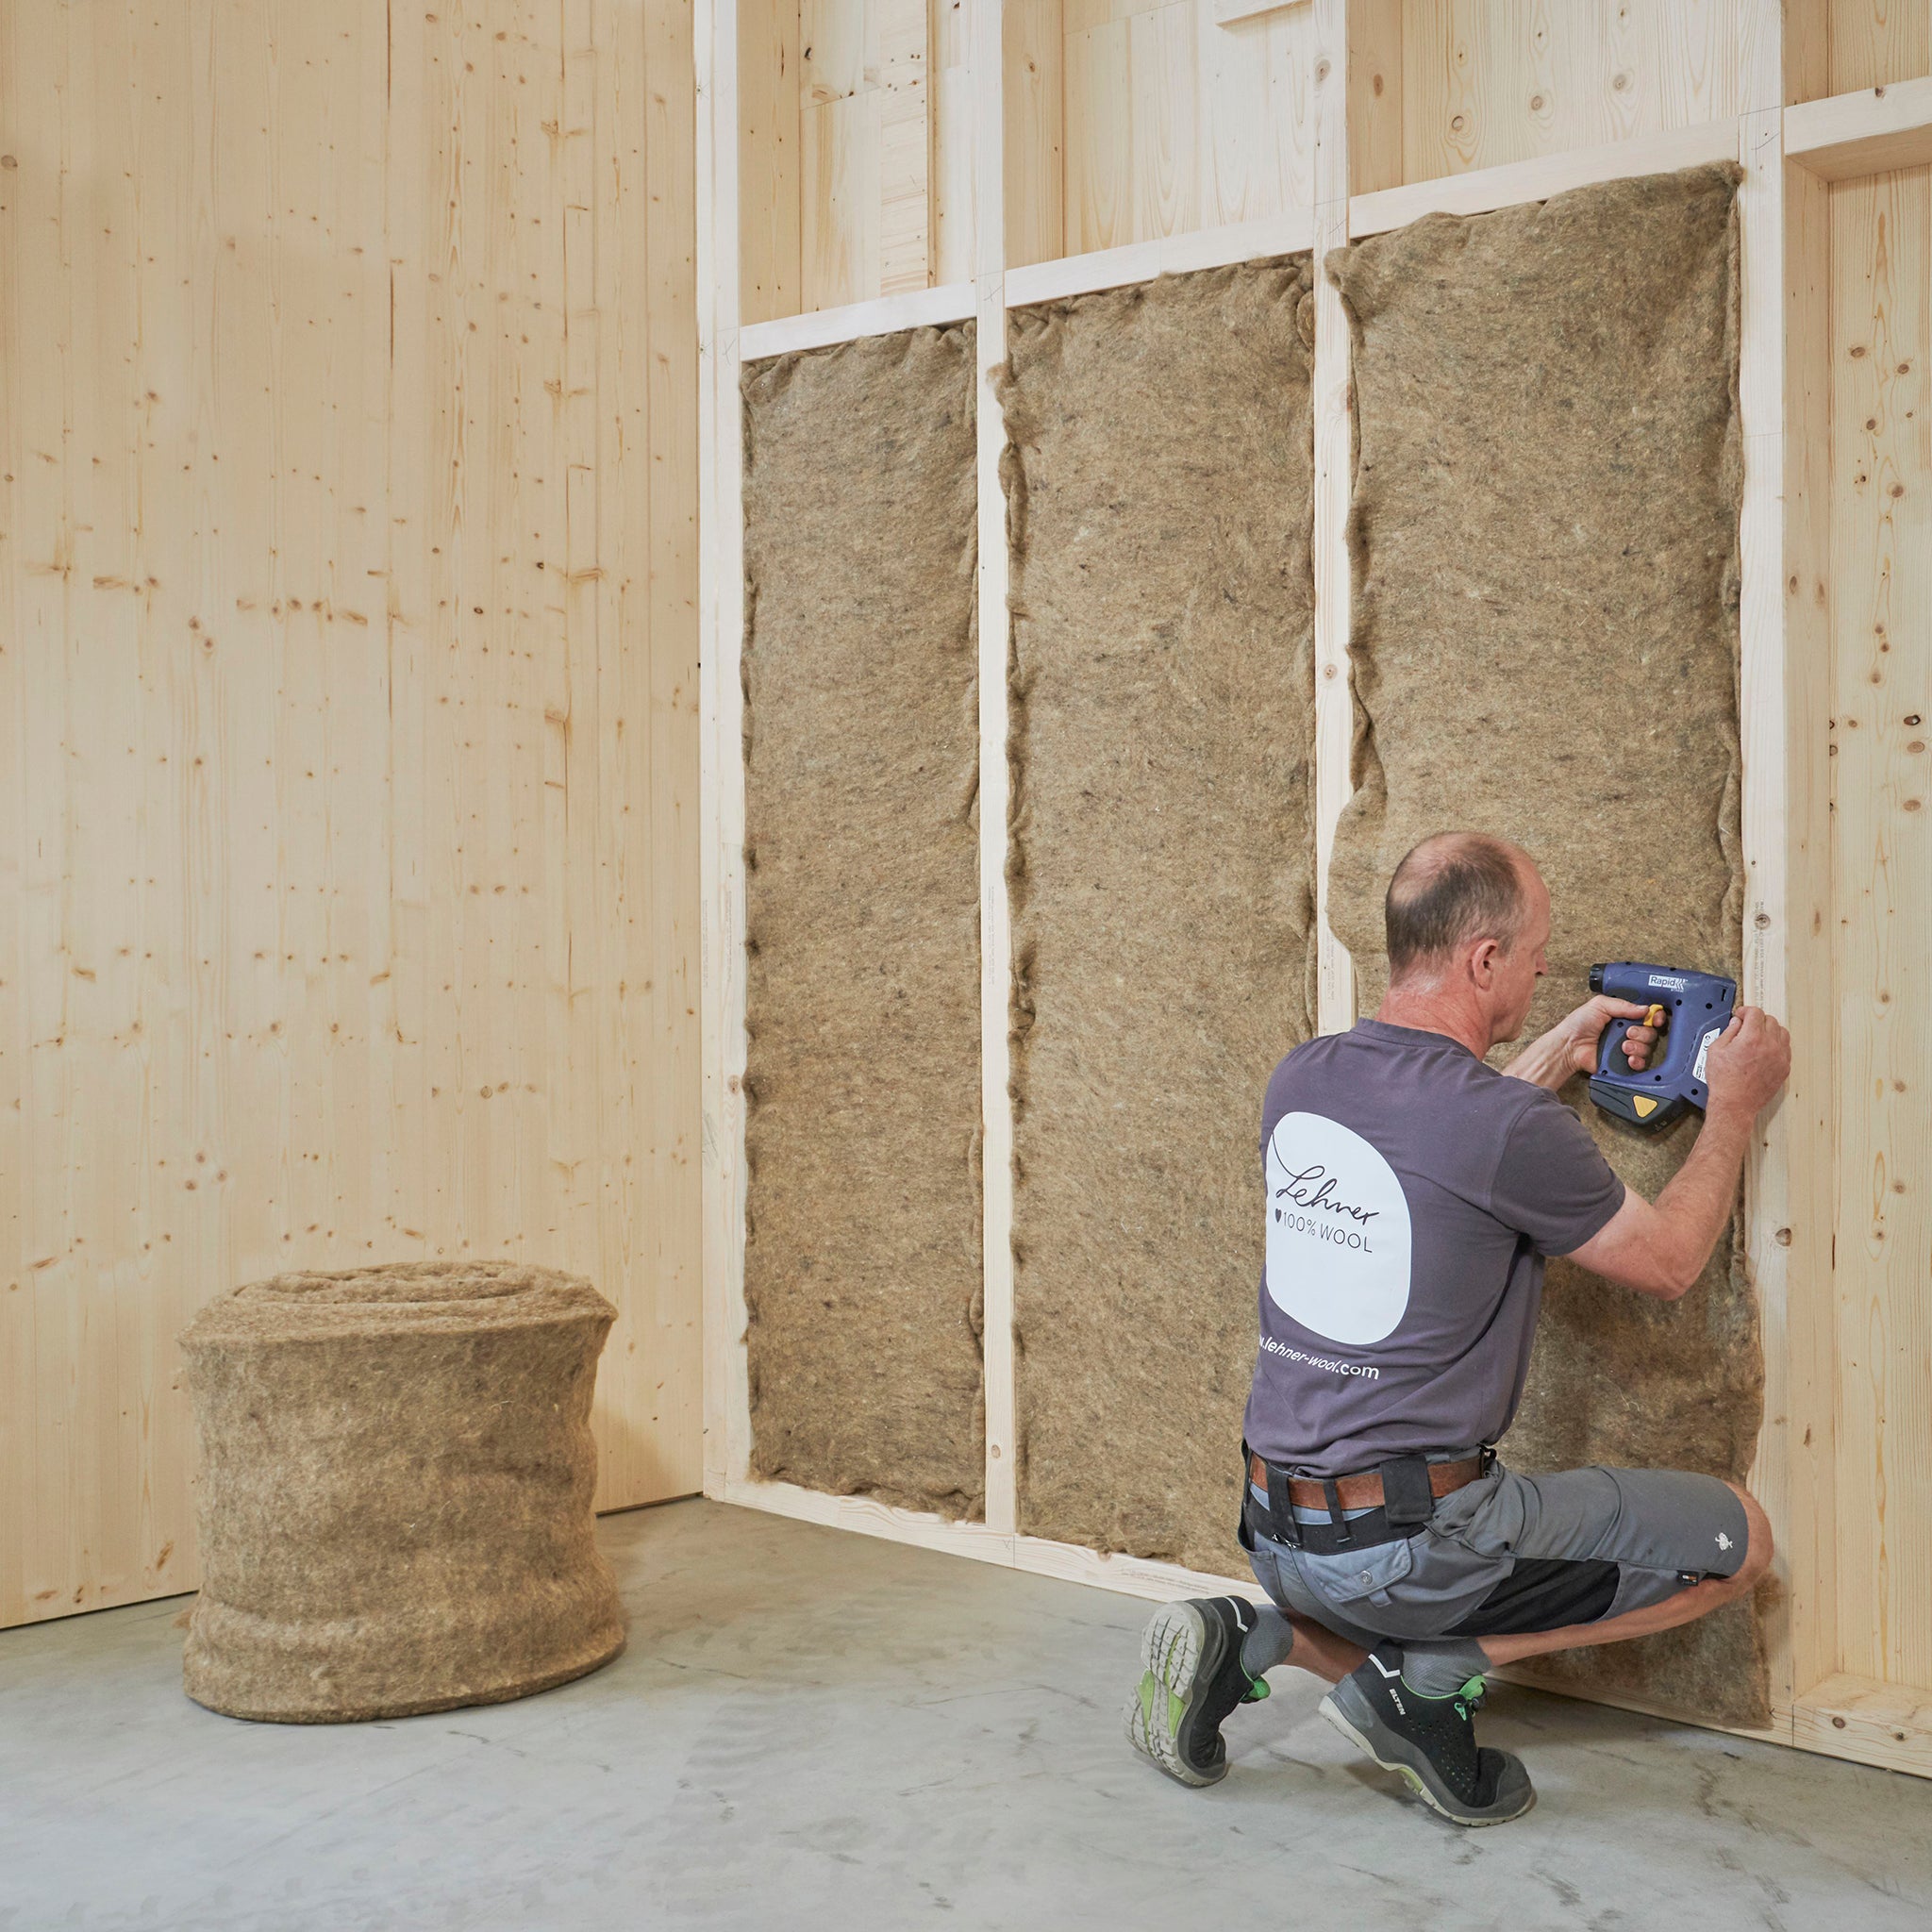 Sheep wool insulation for walls